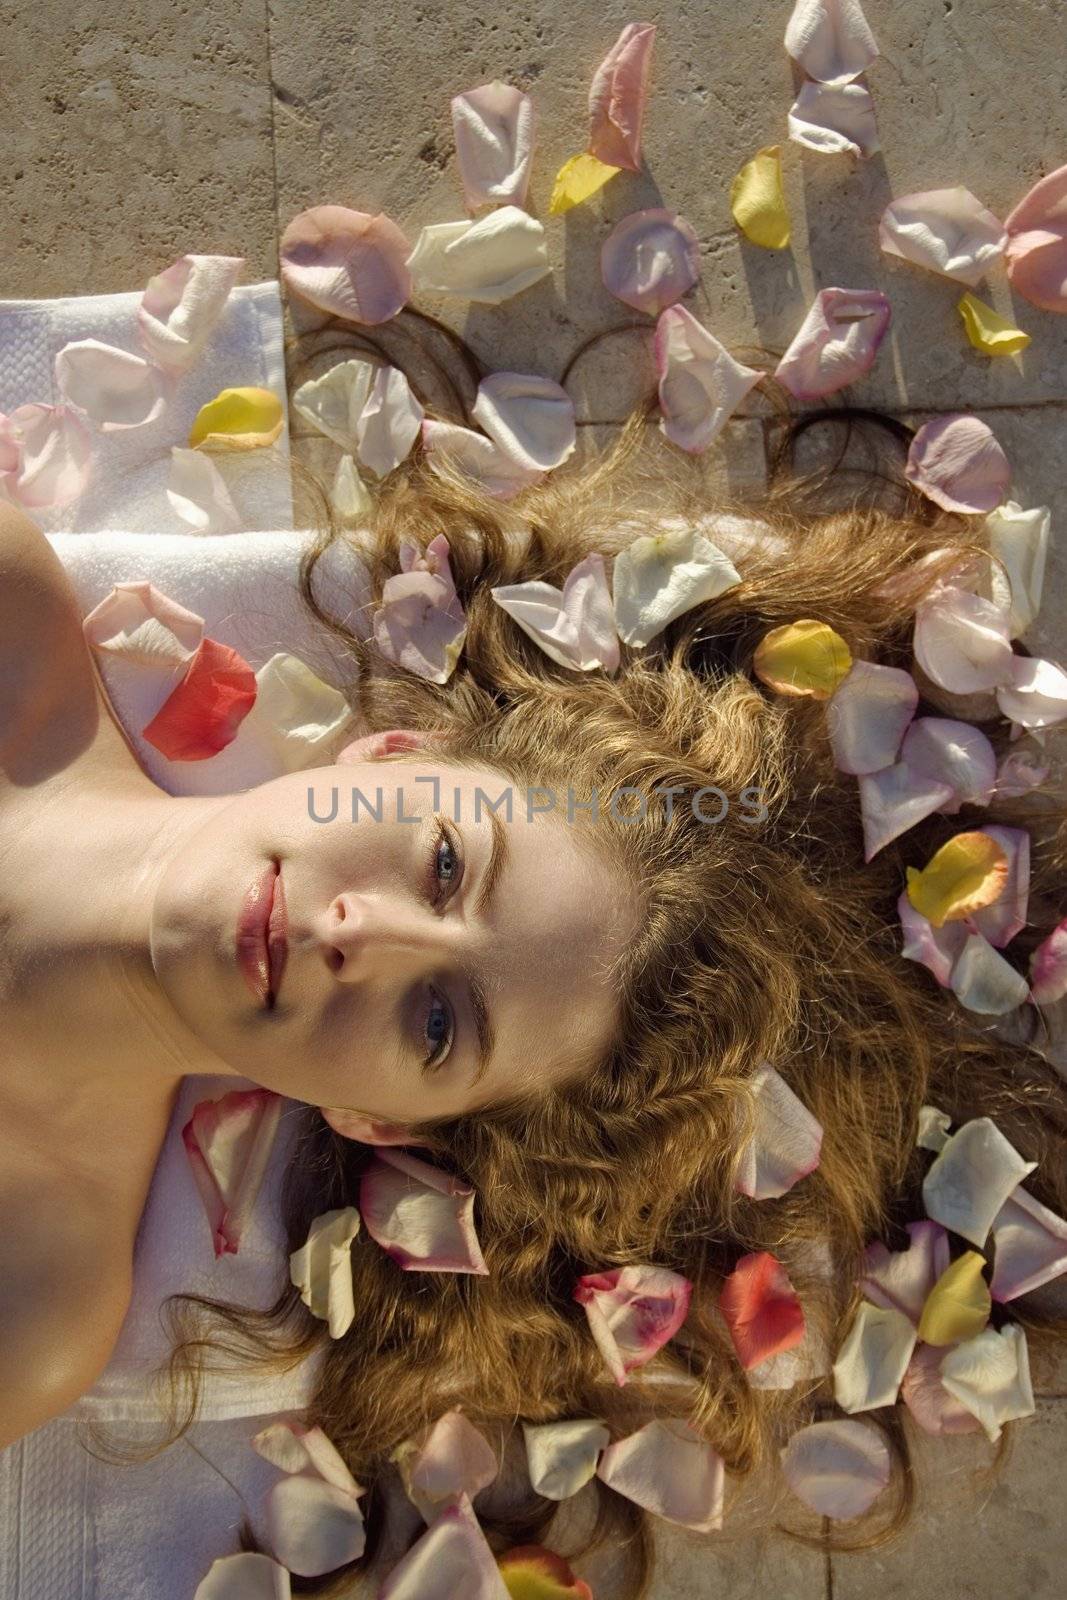 Woman lying on petals. by iofoto